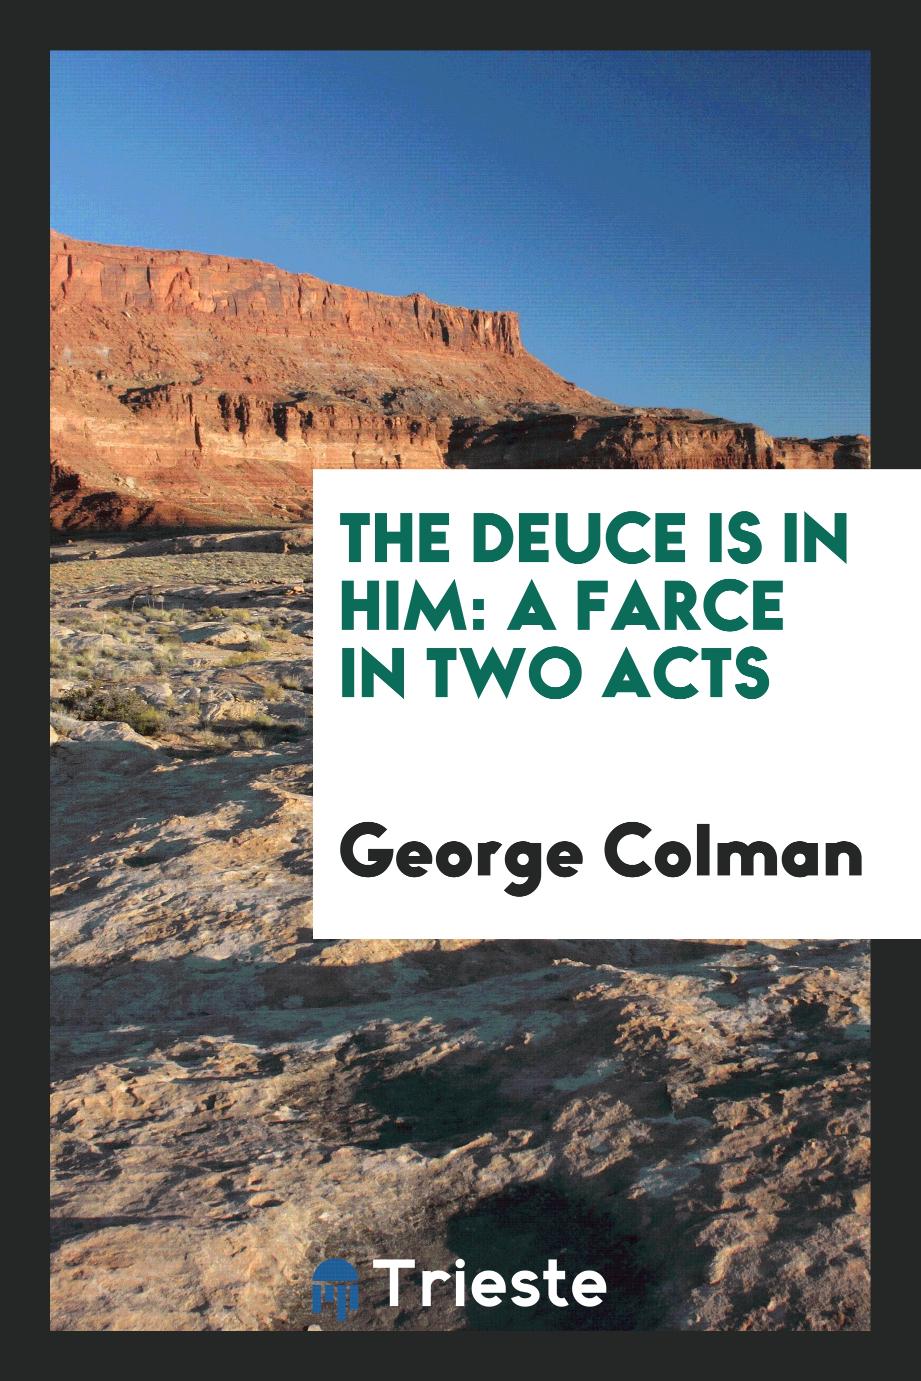 George Colman - The deuce is in him: a farce in two acts